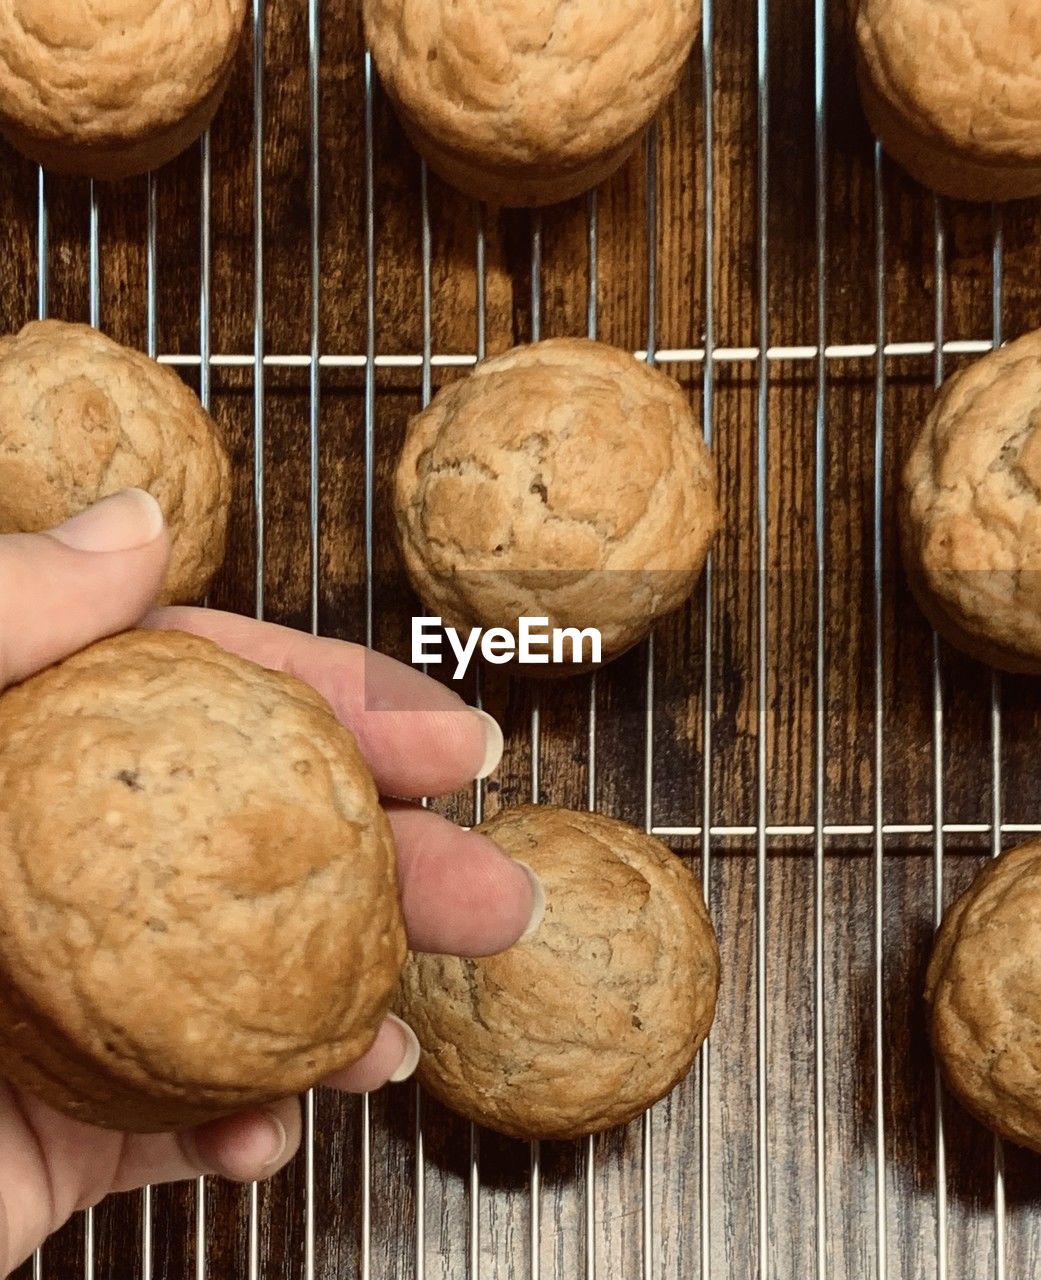 Baked muffins on a rack and hand holding one muffin